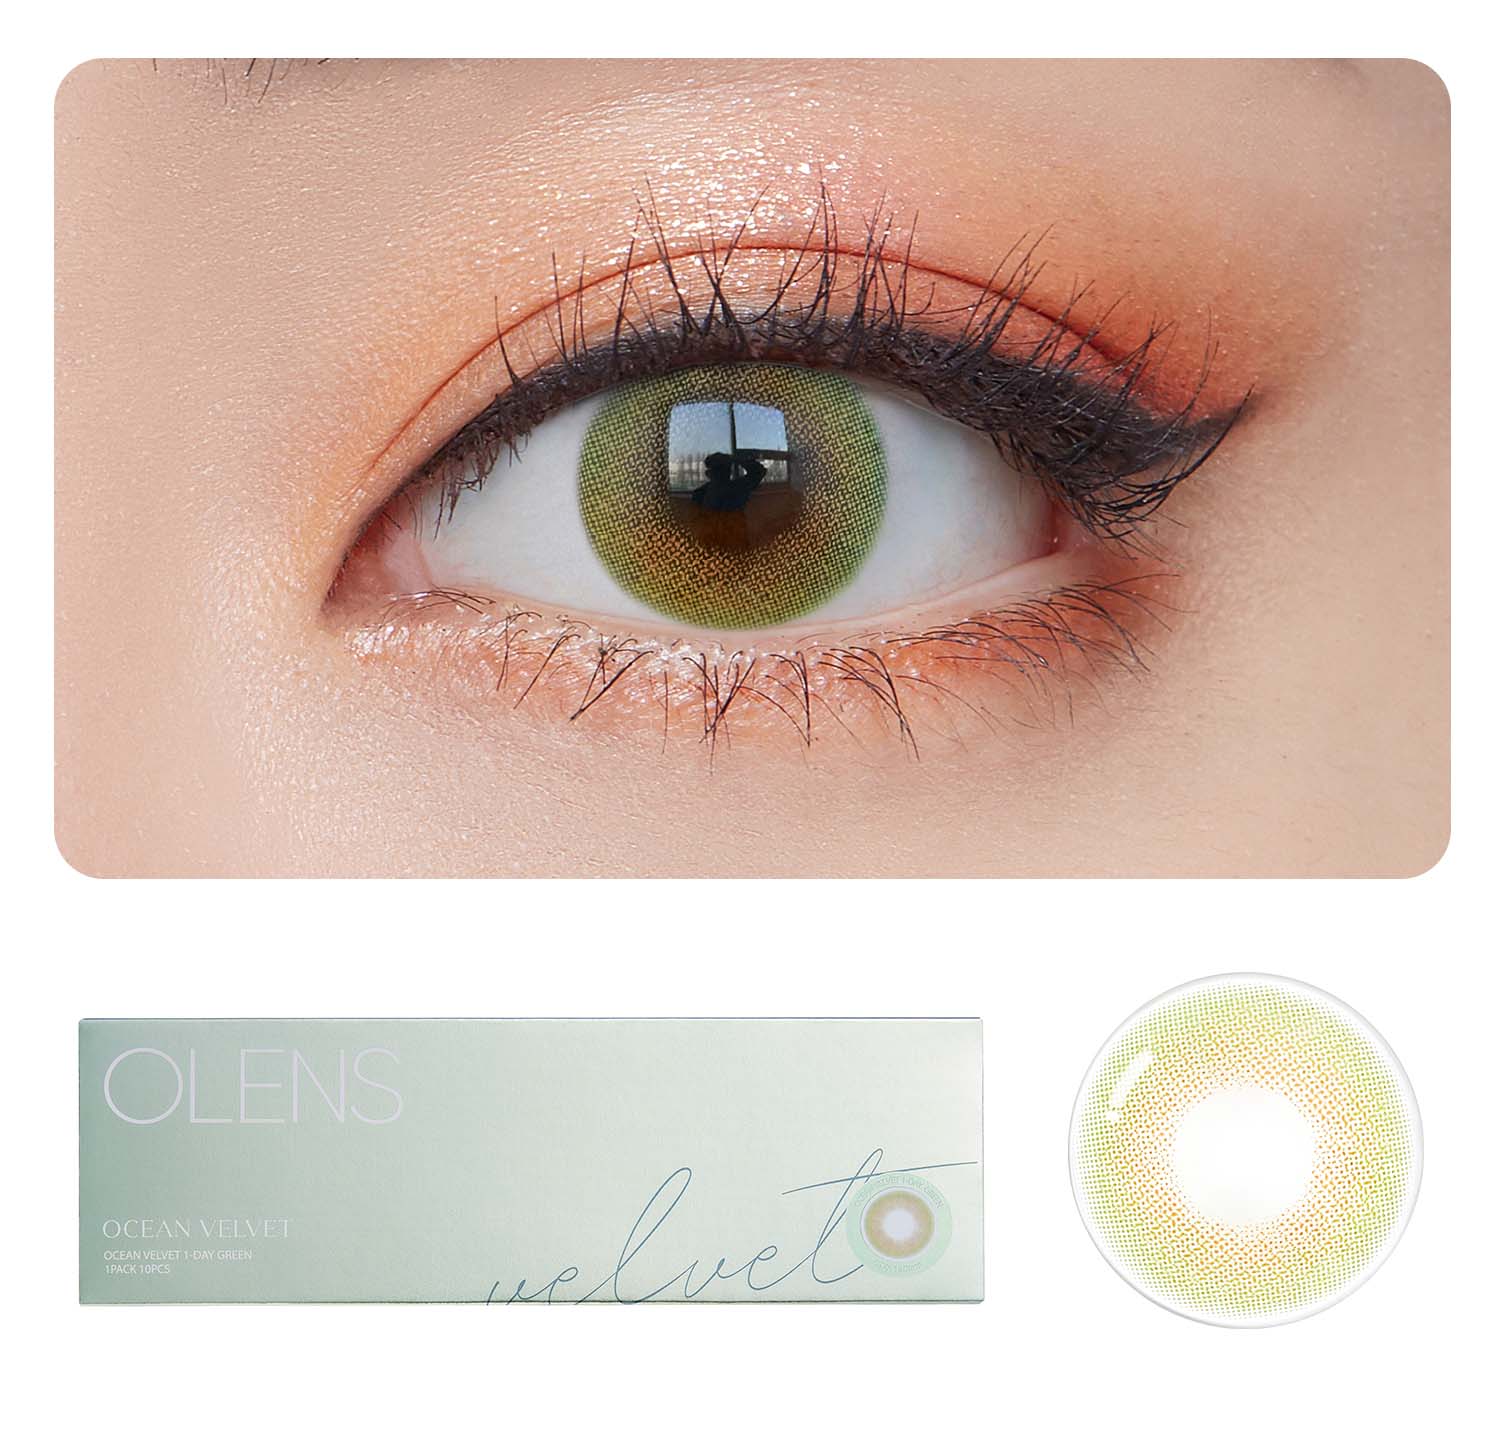 OLENS Premium Color Contact Lens | Ocean Velvet Green contact lens | Natural looking green lens, loved by celebrity makeup artists | 1 day disposable trial pack | o-lens.co.in